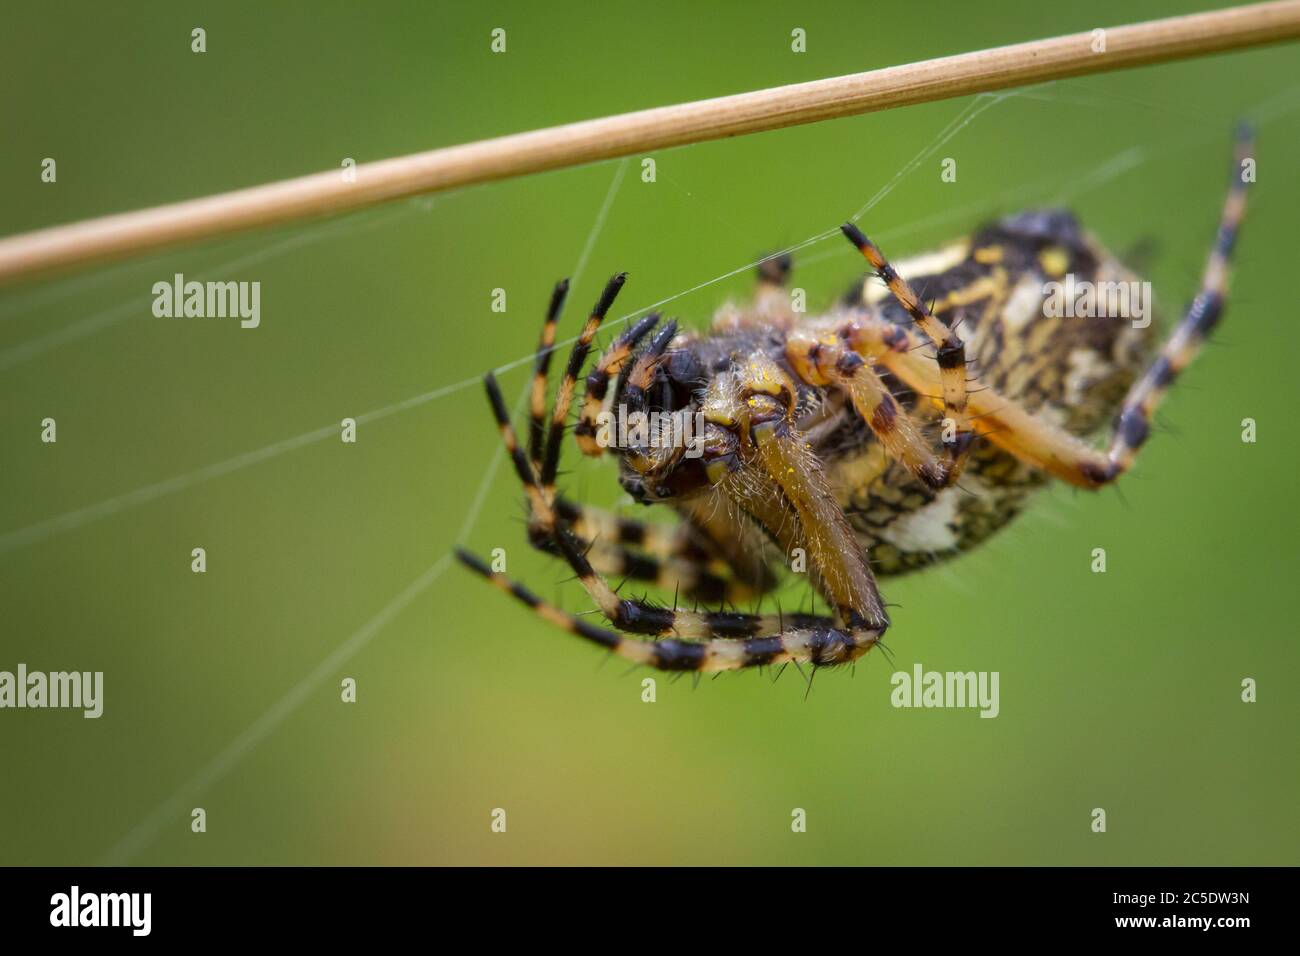 Macro photograph of a spider in the meadow Stock Photo